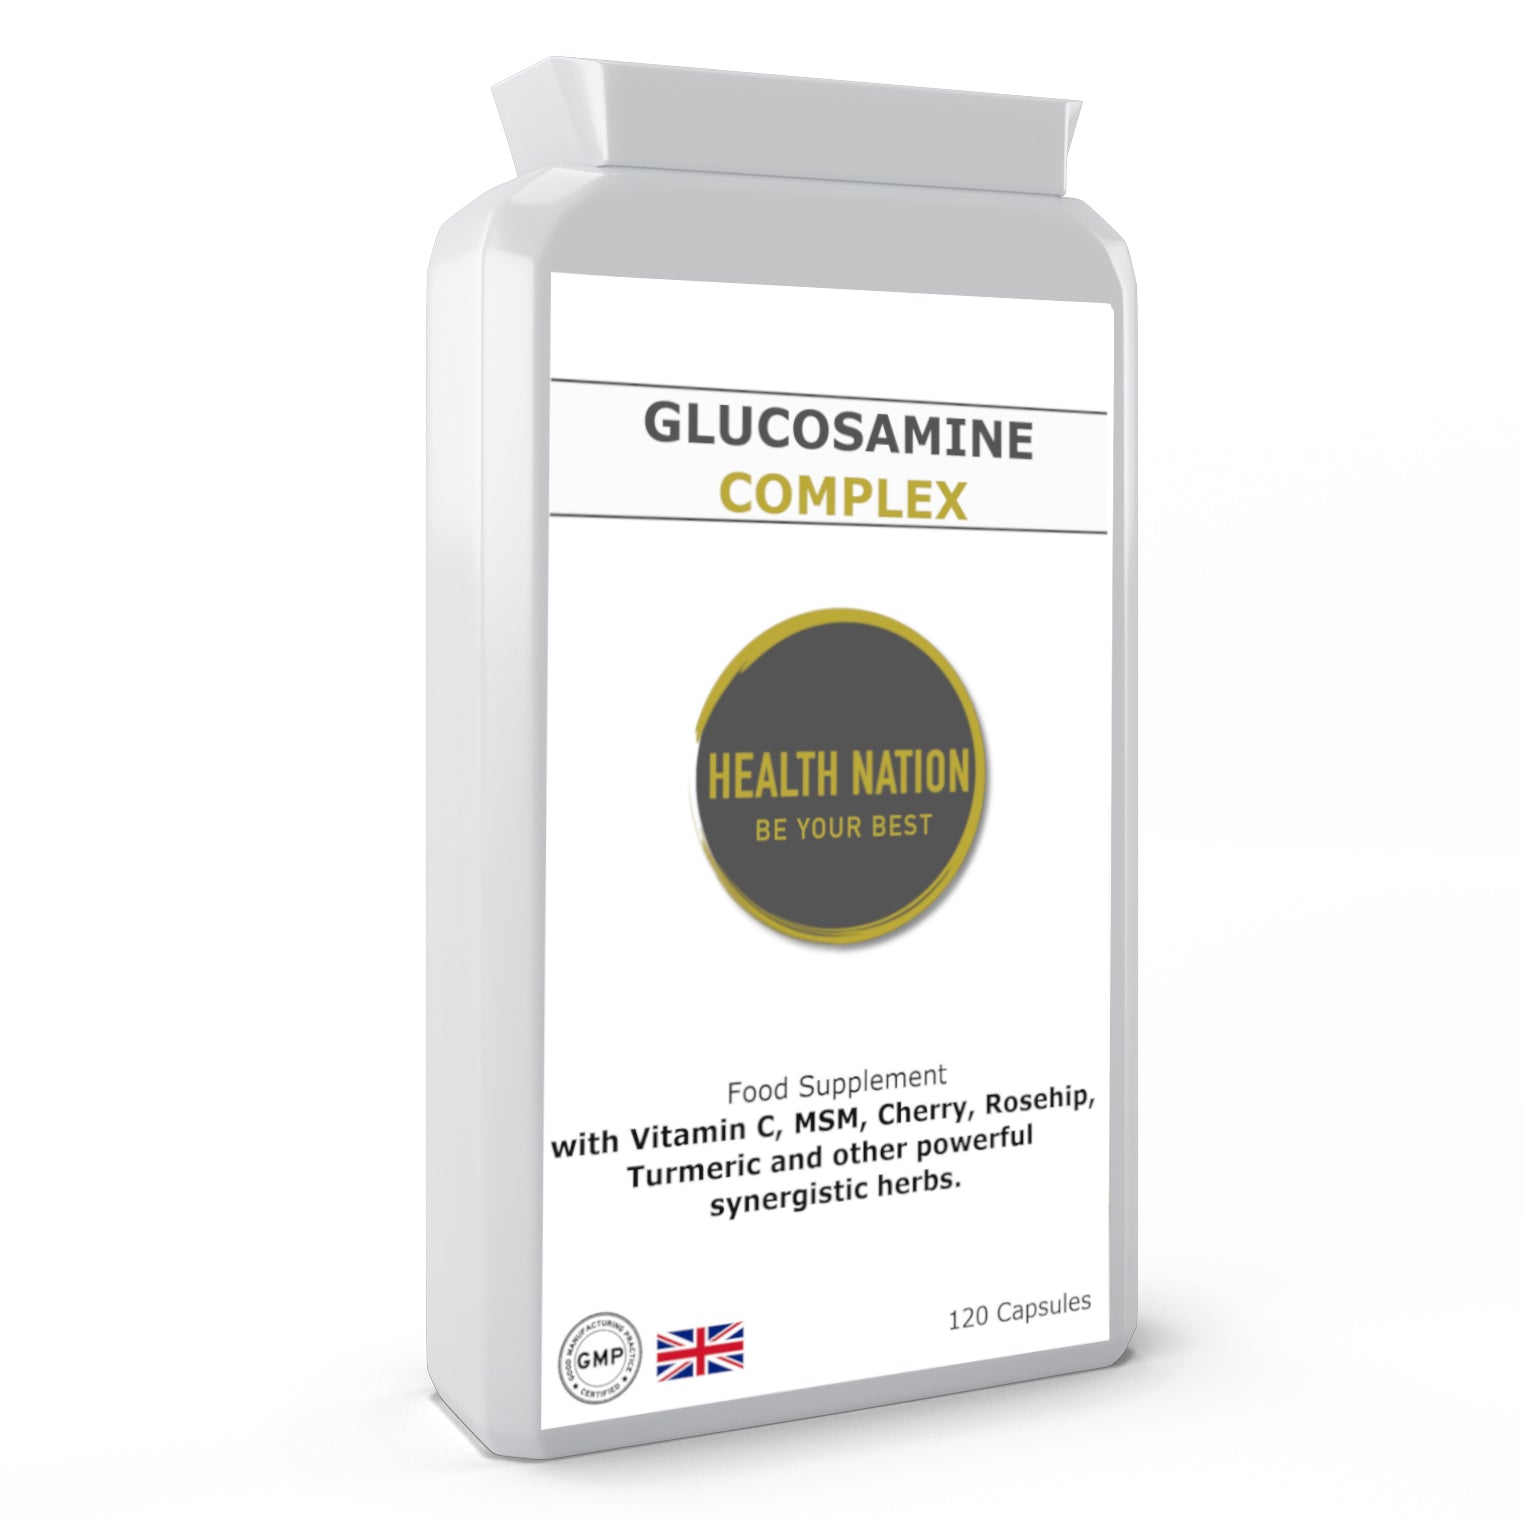 Glucosamine Complex | Helps with Vibrant Skin, Hair, Nails, Anti-Ageing, Detox, Cartilage Health and Joint Paint | 120 Capsules